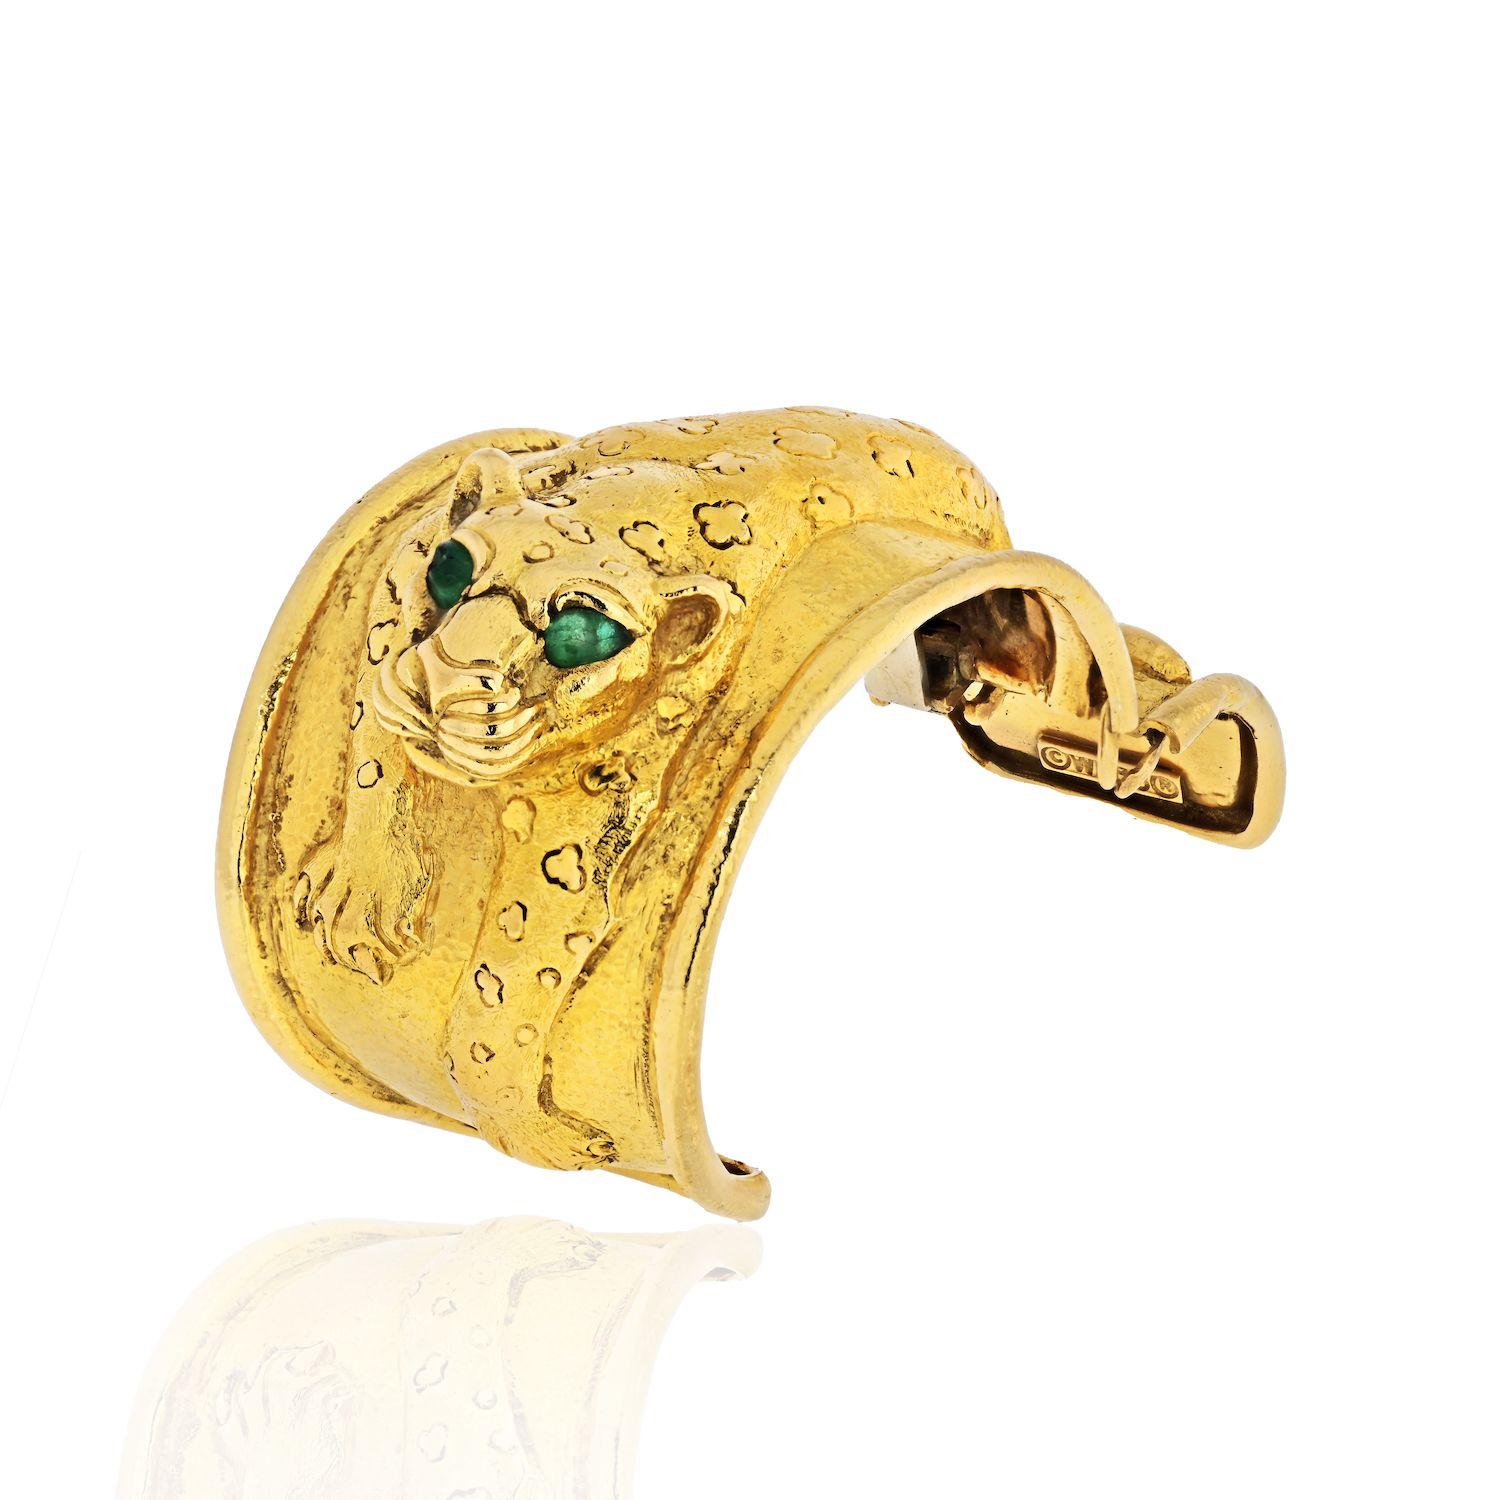 The wide hinged cuff depicting a crouching repoussé leopard set with two pear shaped emerald eyes, the emeralds weighing 0.7 total carats, in textured 18k yellow gold. Handmade in New York City by David Webb.
For a small wrist: 5.75-6 inches
